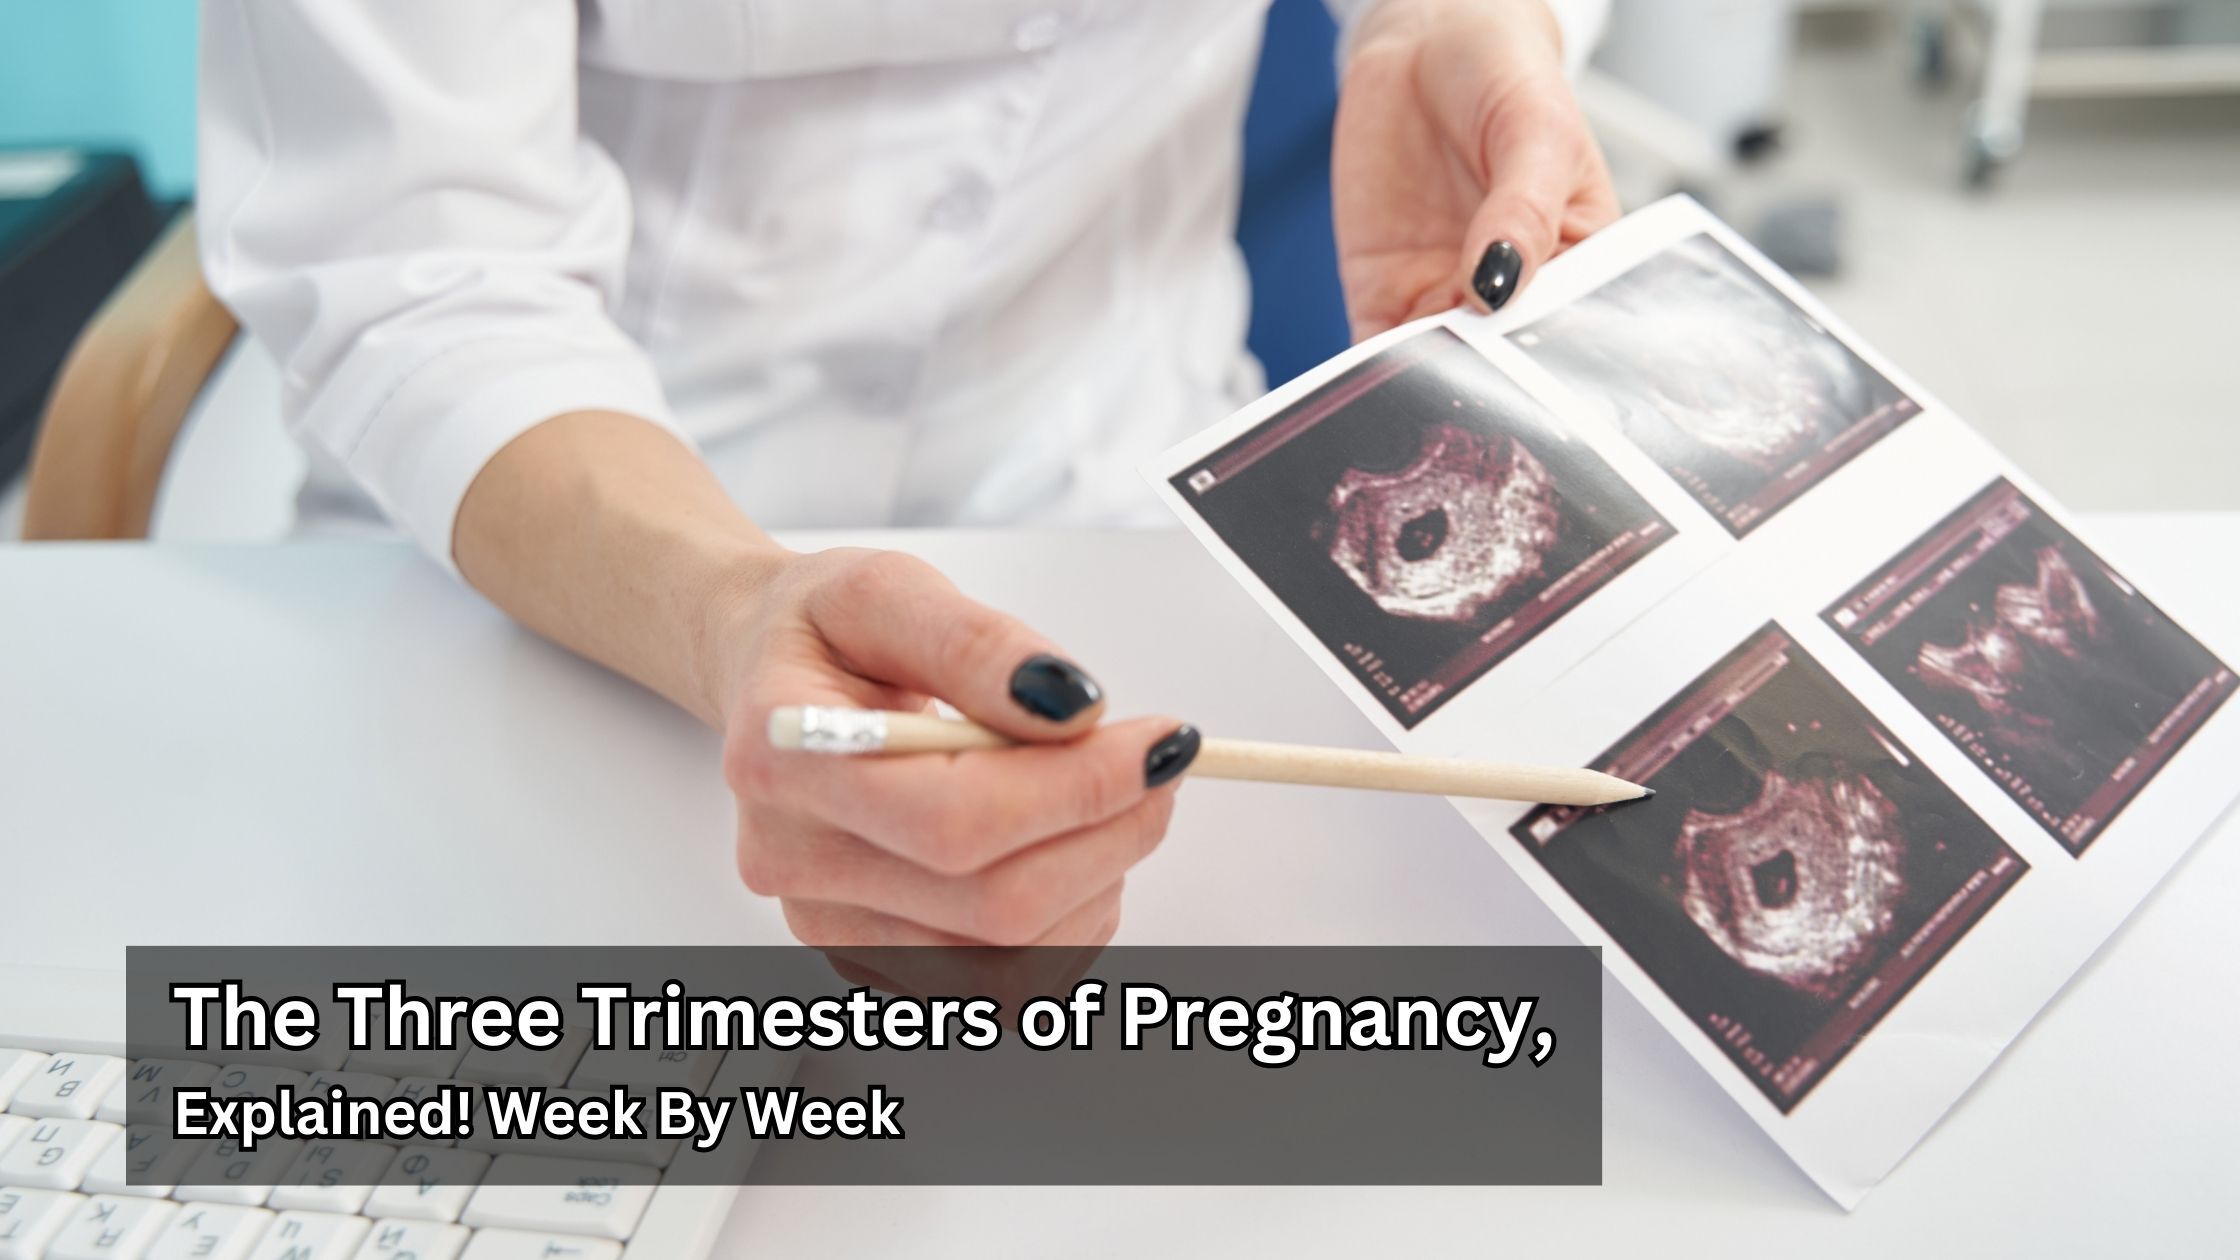 The Three Trimesters of Pregnancy